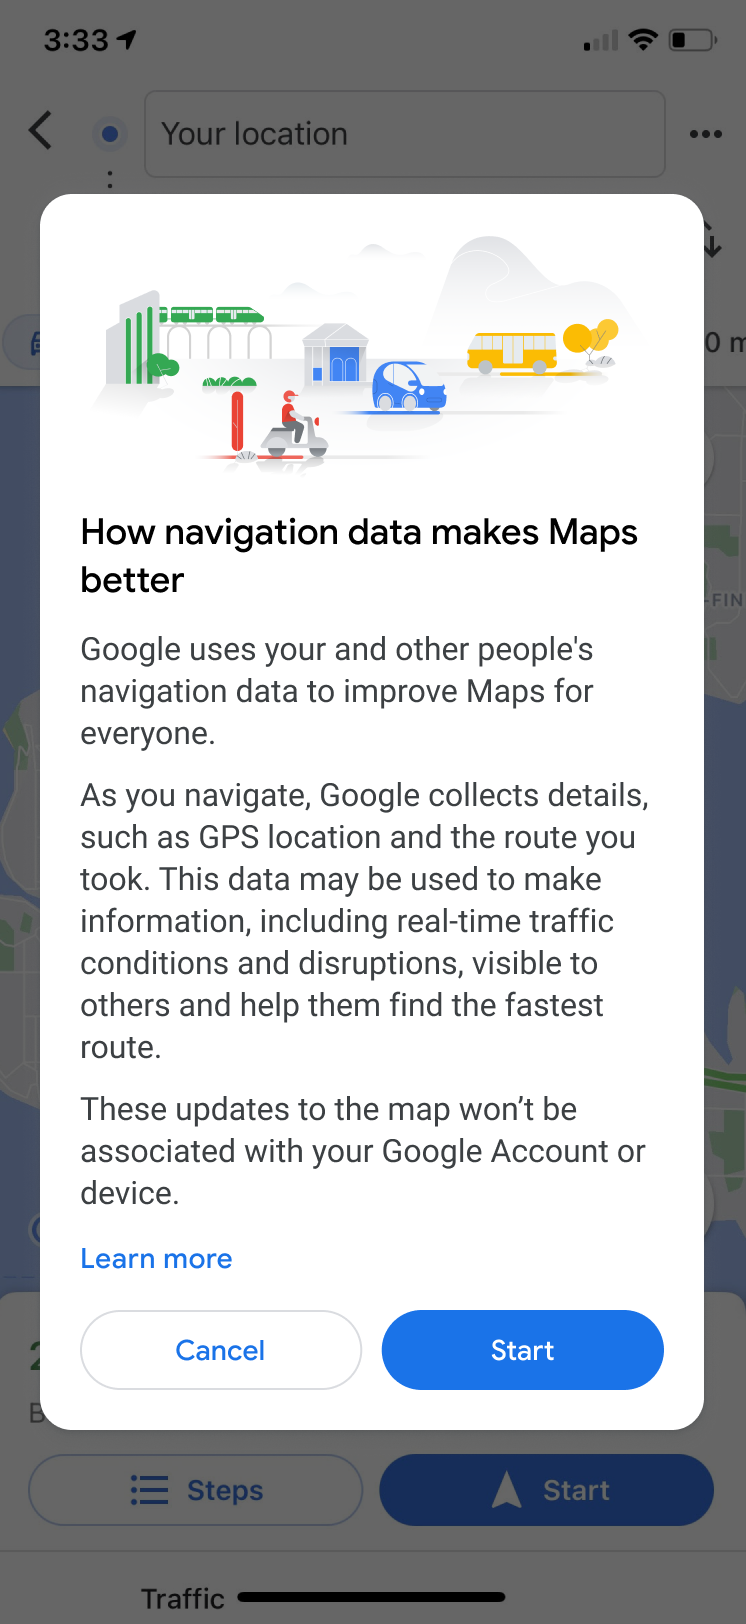 From tomorrow, Google Maps will limit navigation features if you don’t agree to share your live location data